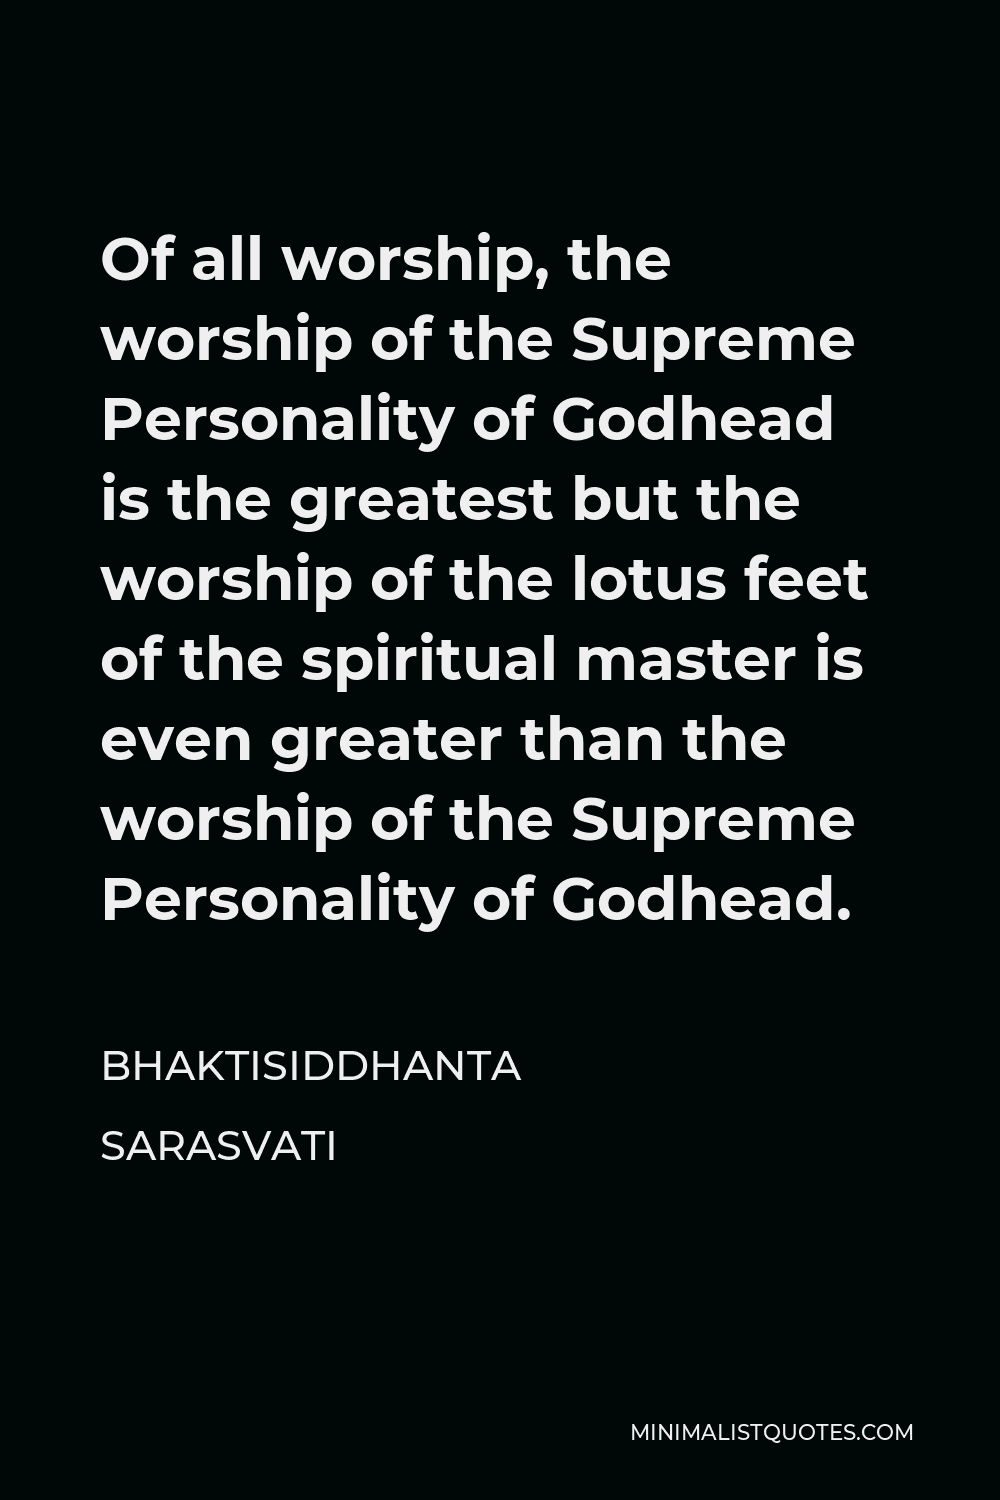 Bhaktisiddhanta Sarasvati Quote - Of all worship, the worship of the Supreme Personality of Godhead is the greatest but the worship of the lotus feet of the spiritual master is even greater than the worship of the Supreme Personality of Godhead.